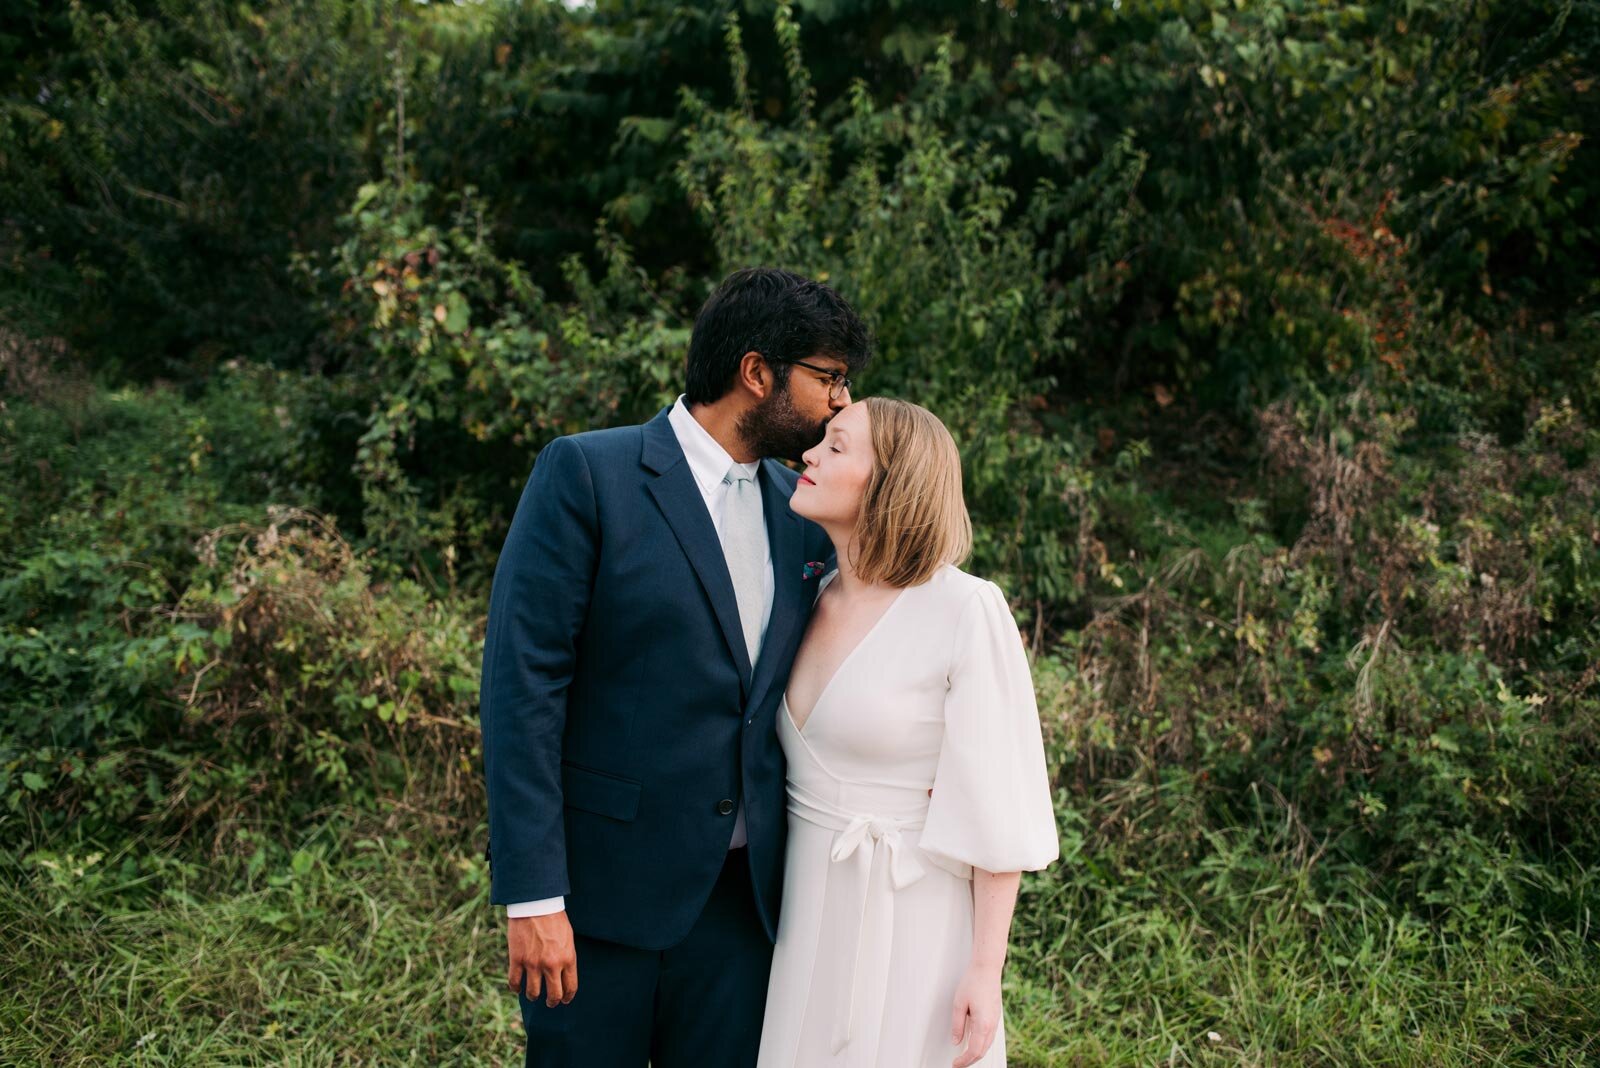 Groom kissing bride's forehead before lush greenery in Pittsburgh PA Carly Romeo + Co.